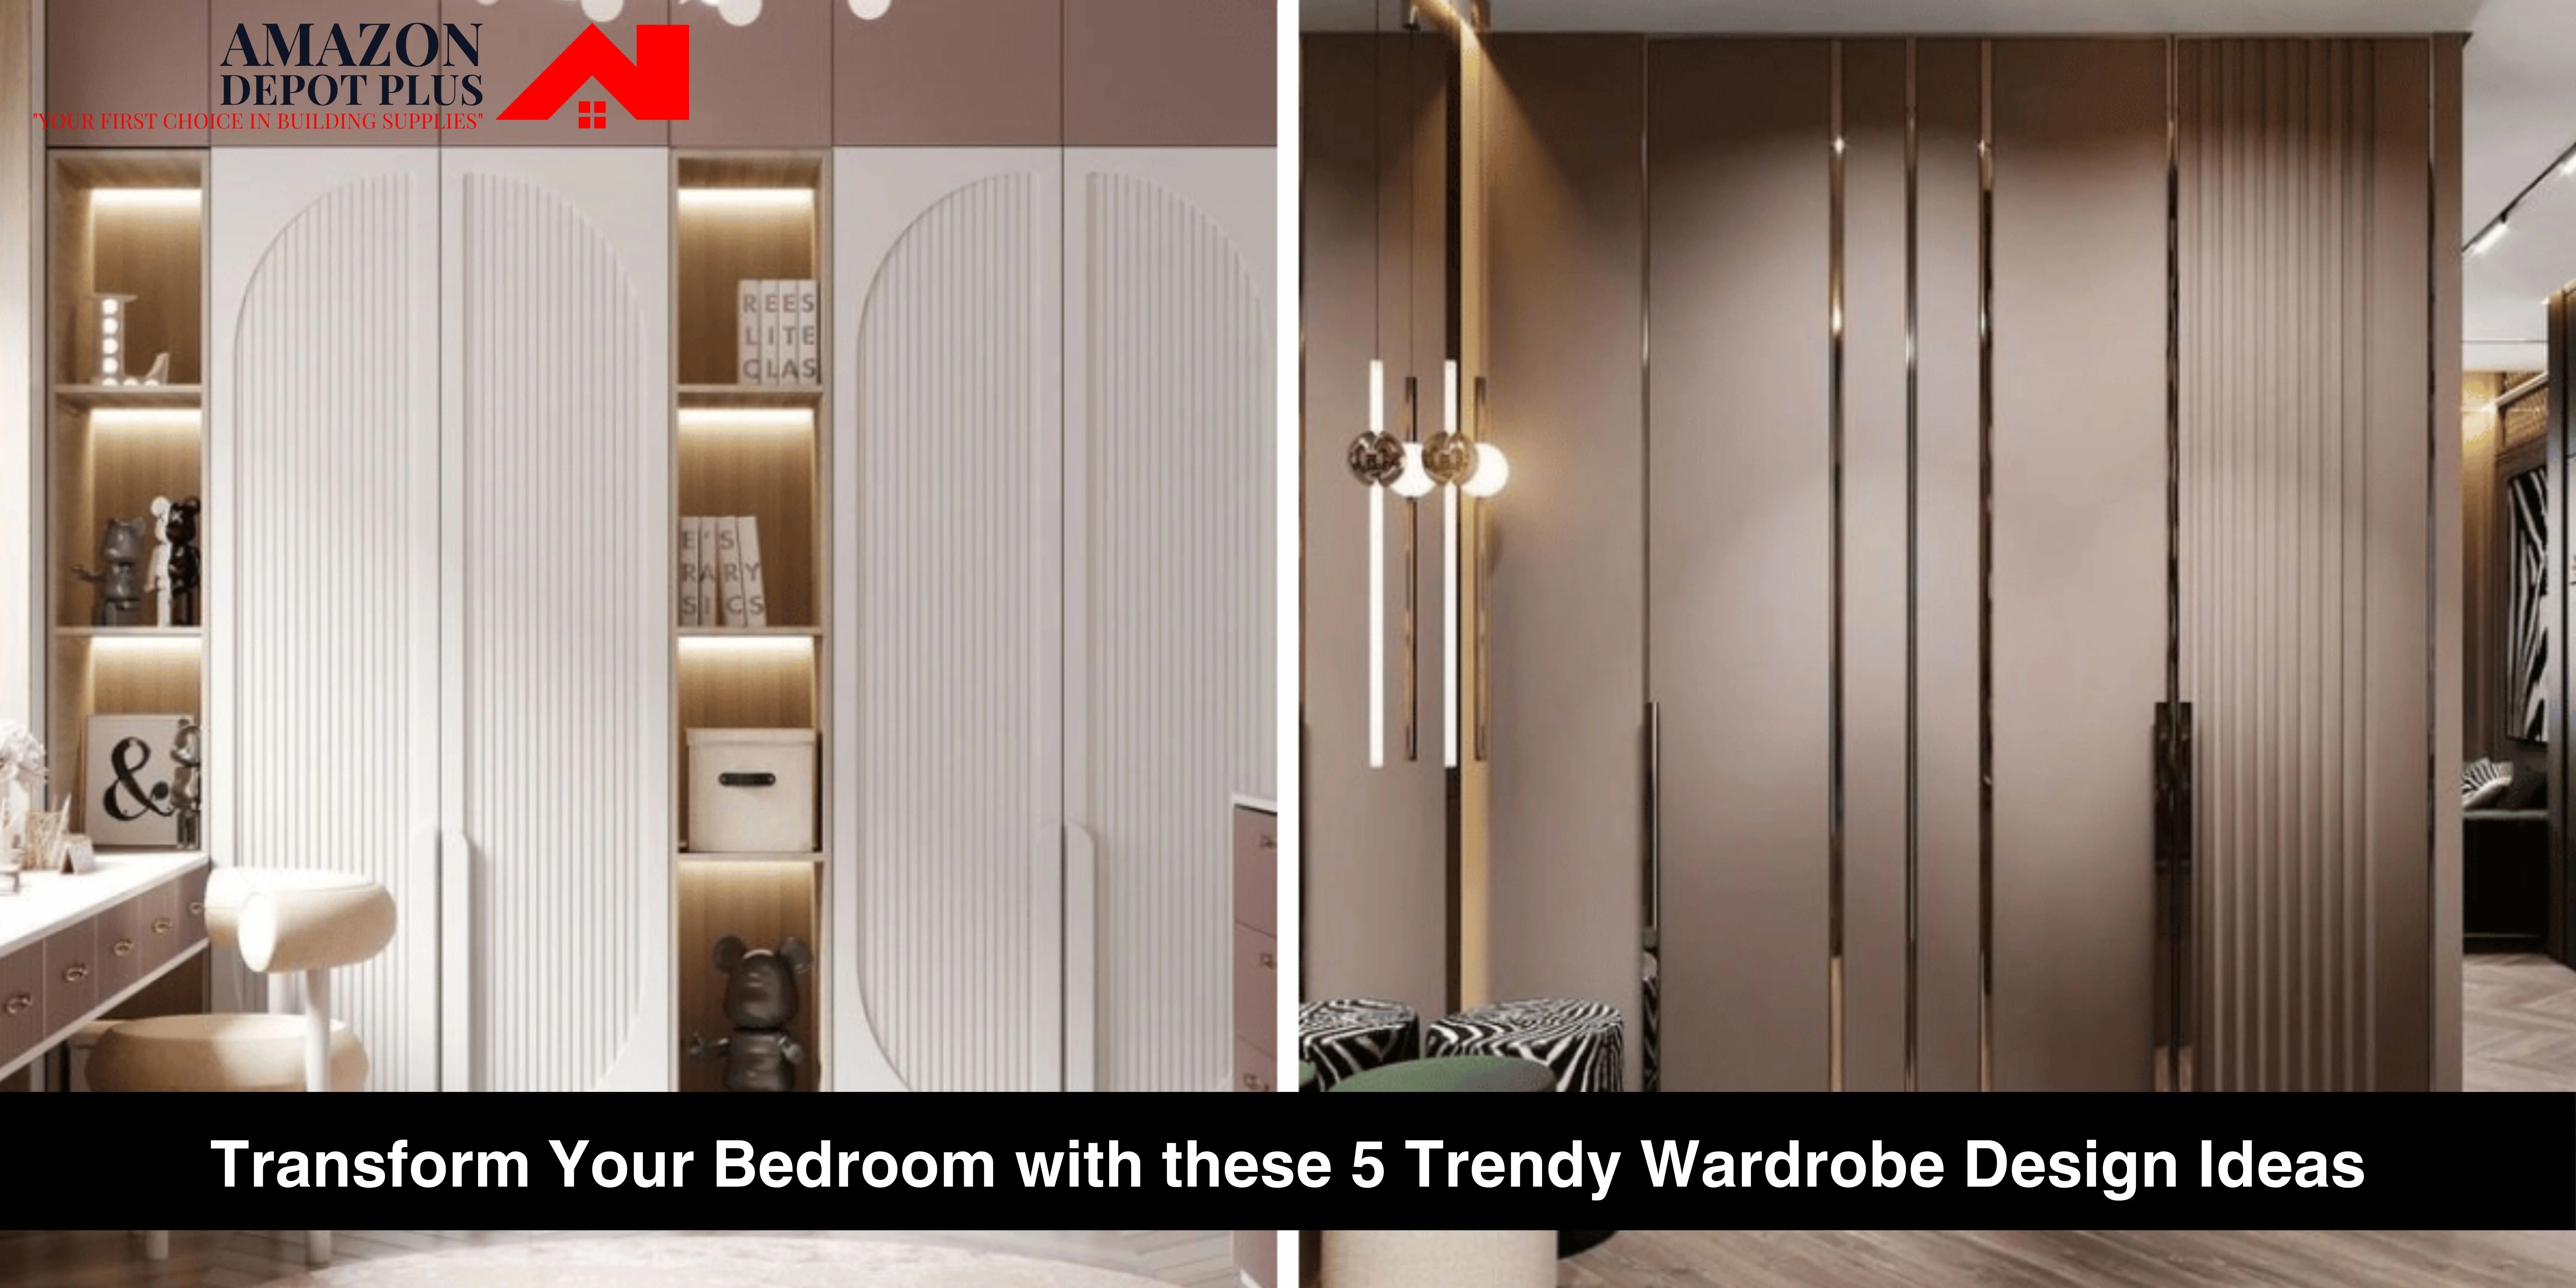 Transform Your Bedroom with these 5 Trendy Wardrobe Design Ideas